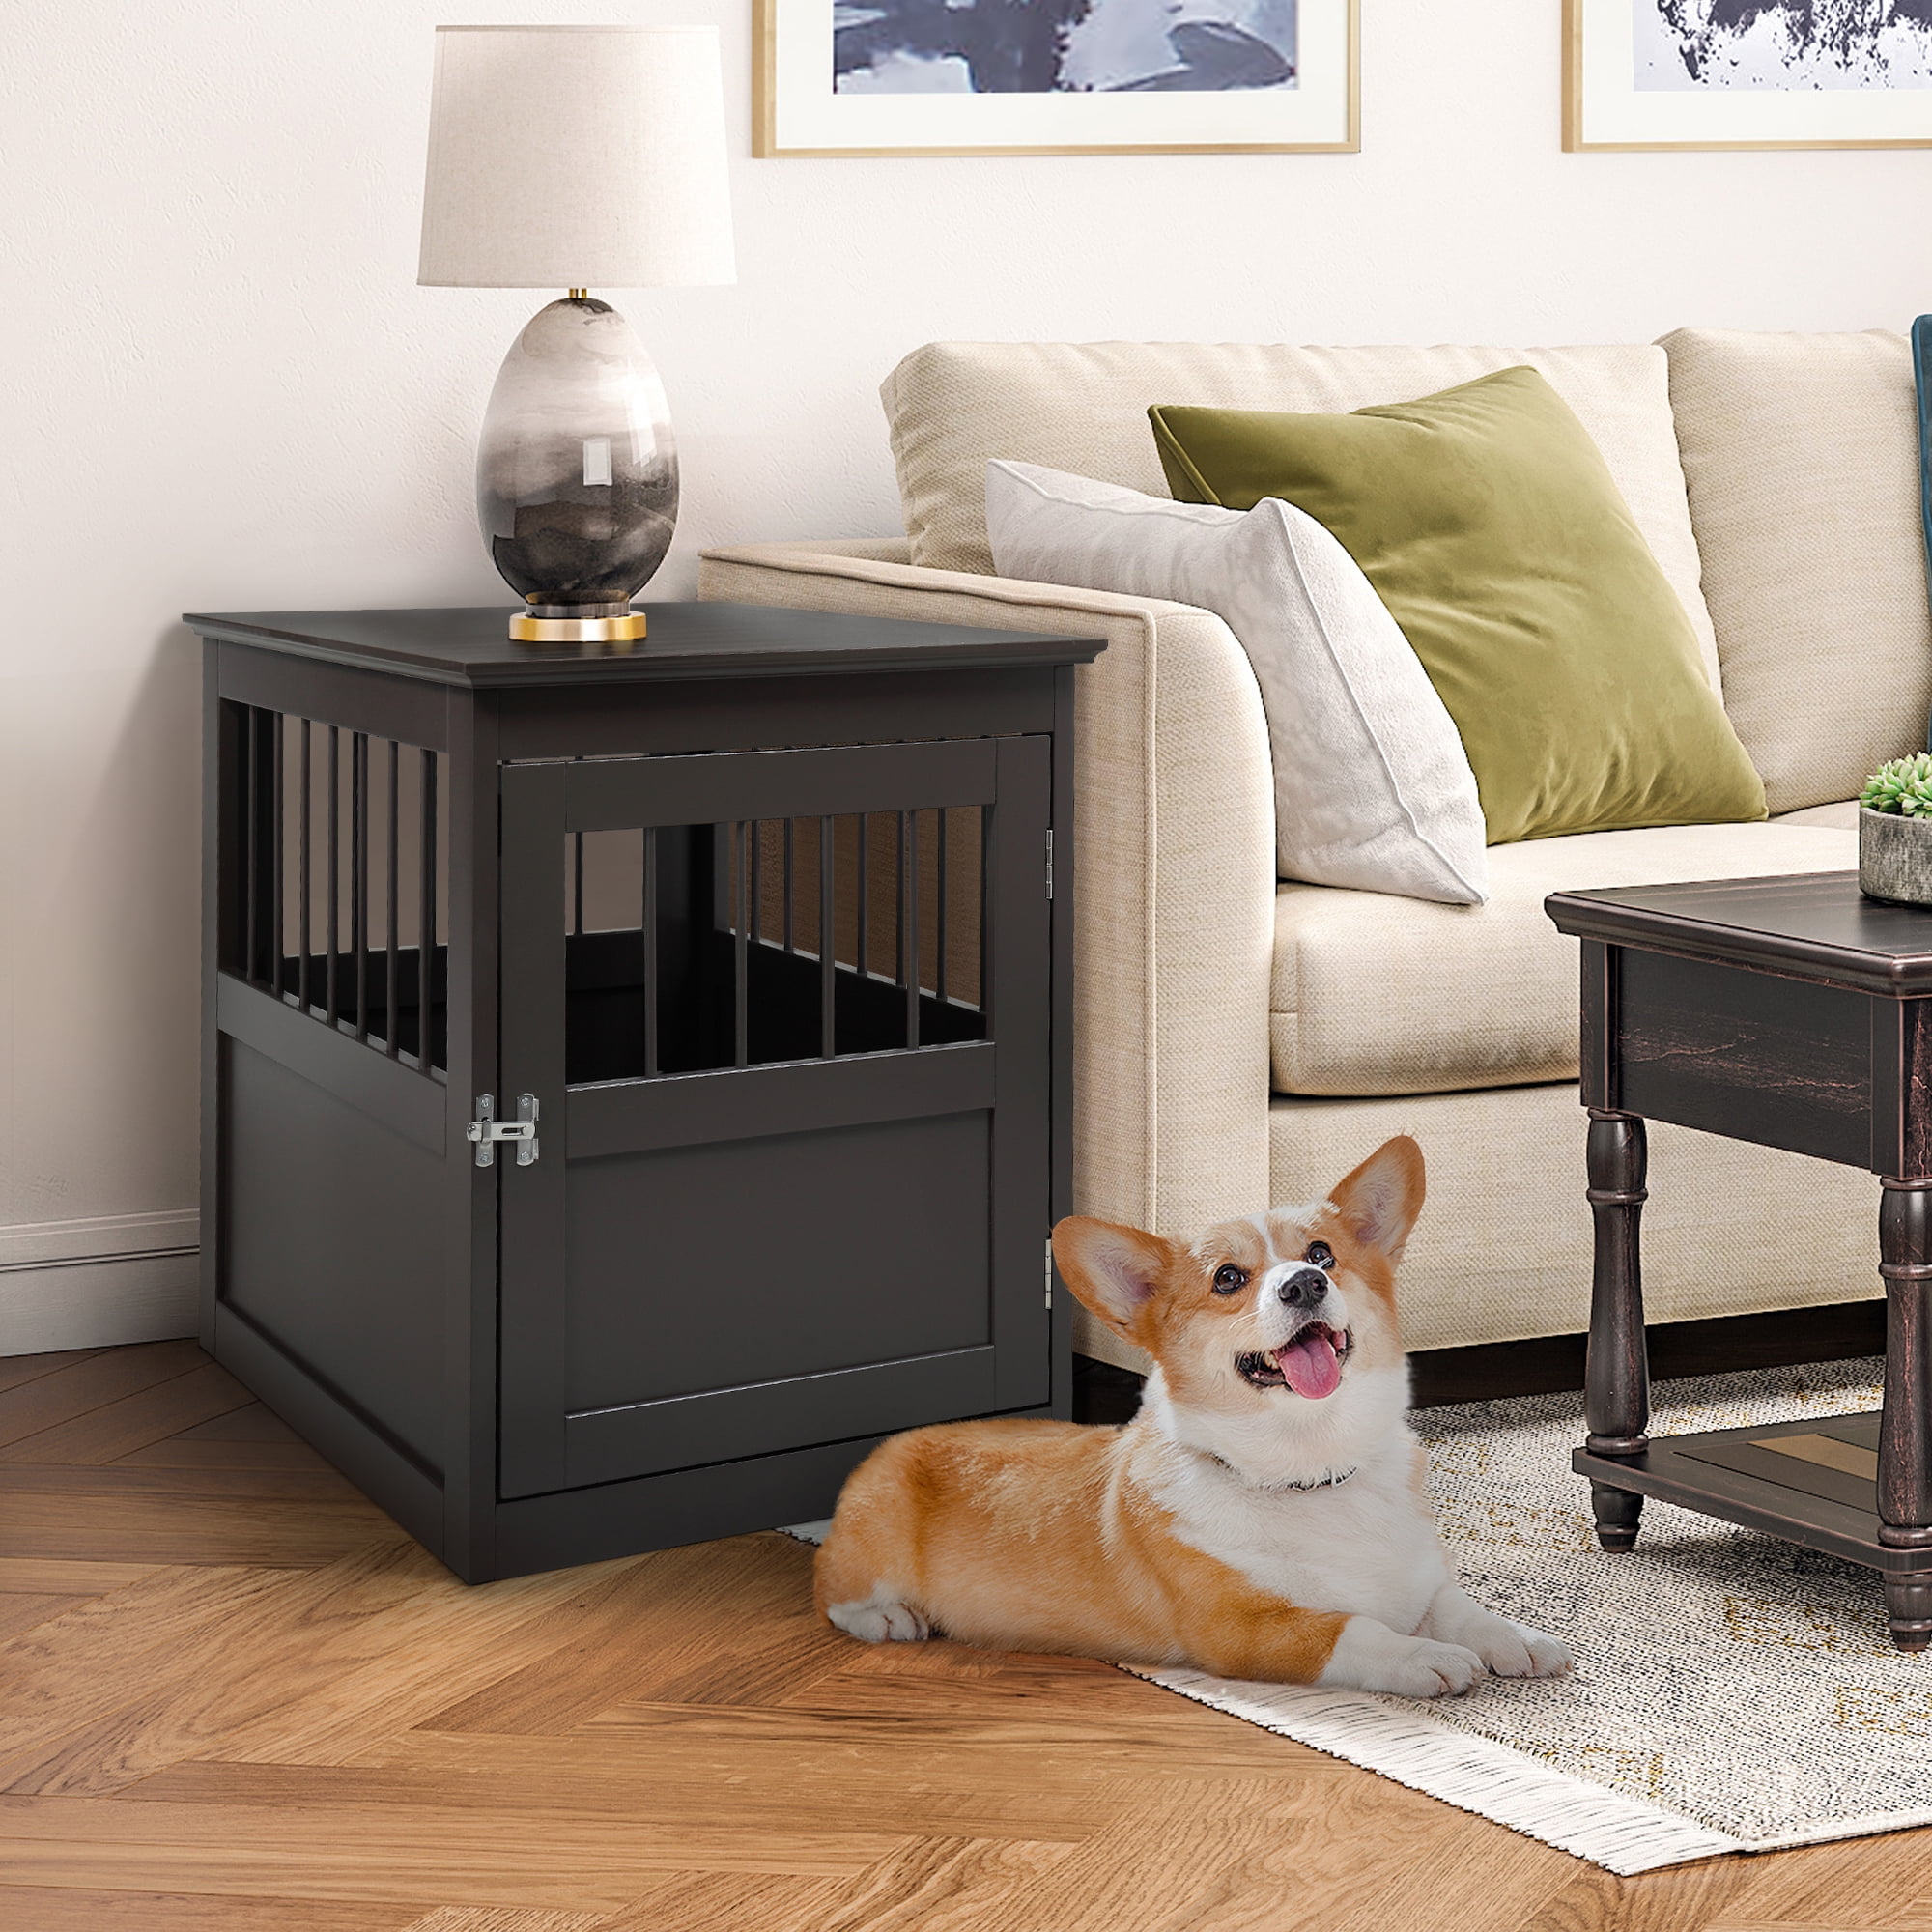 Wood & Wire Dog Crate SIMPLY Wooden Dog Cage House Pet Crate End Table with Cushion Dog Kennel Indoor Wooden Crates Bed Side Furniture with Dog Pad for Small Medium Pets Chew-Proof 